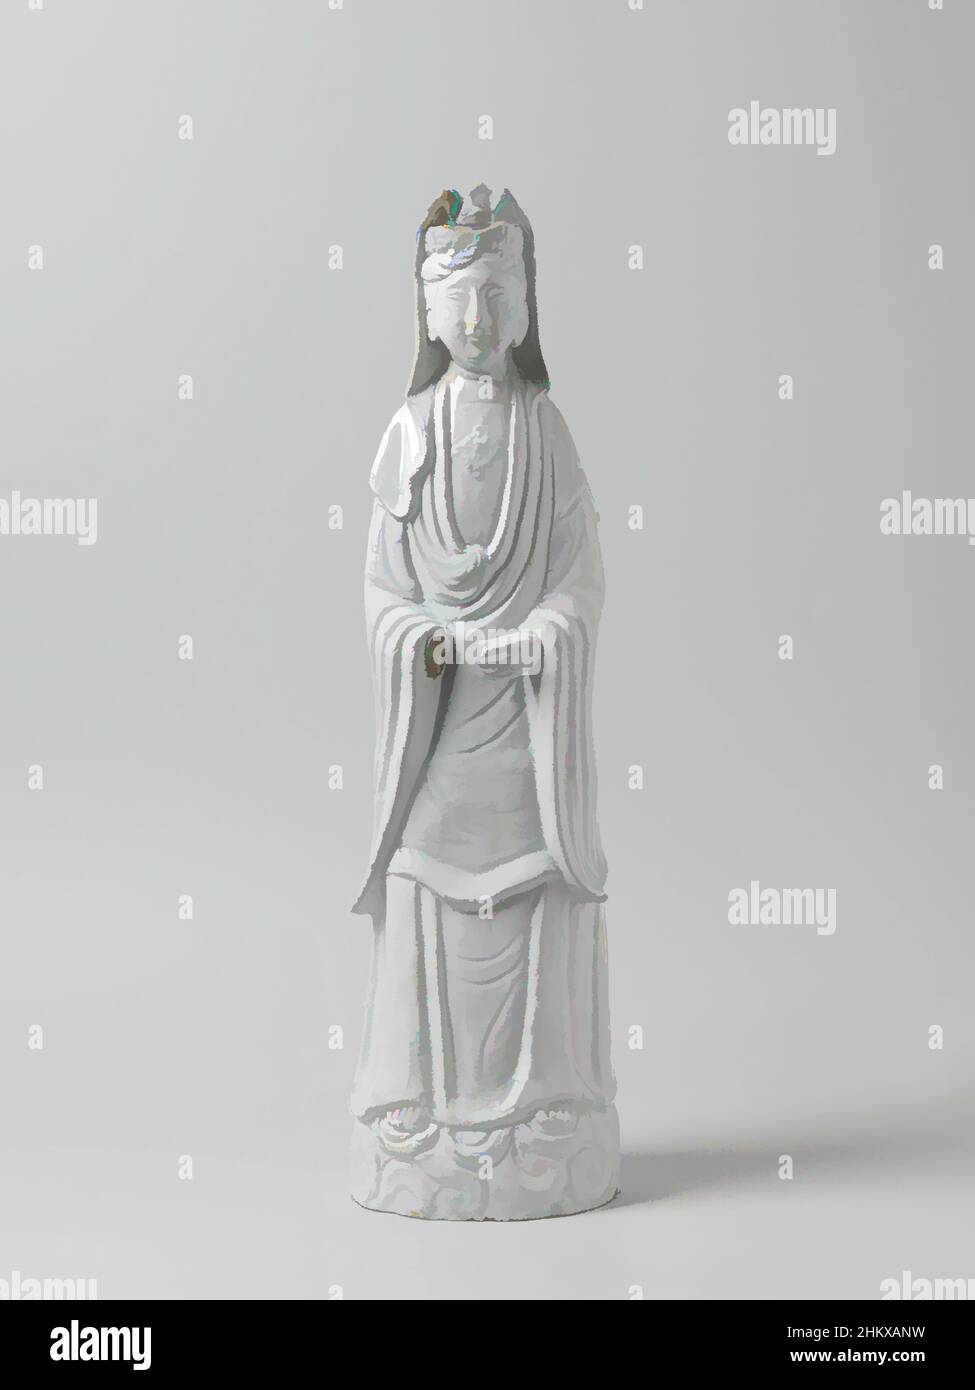 Art inspired by Guanyin, Kuan-Yin, Female figure of faience, representing Guanyin. White glazed., Ansbach, c. 1720 - c. 1750, height 65 cm × width 18 cm × depth 16.5 cm, Classic works modernized by Artotop with a splash of modernity. Shapes, color and value, eye-catching visual impact on art. Emotions through freedom of artworks in a contemporary way. A timeless message pursuing a wildly creative new direction. Artists turning to the digital medium and creating the Artotop NFT Stock Photo